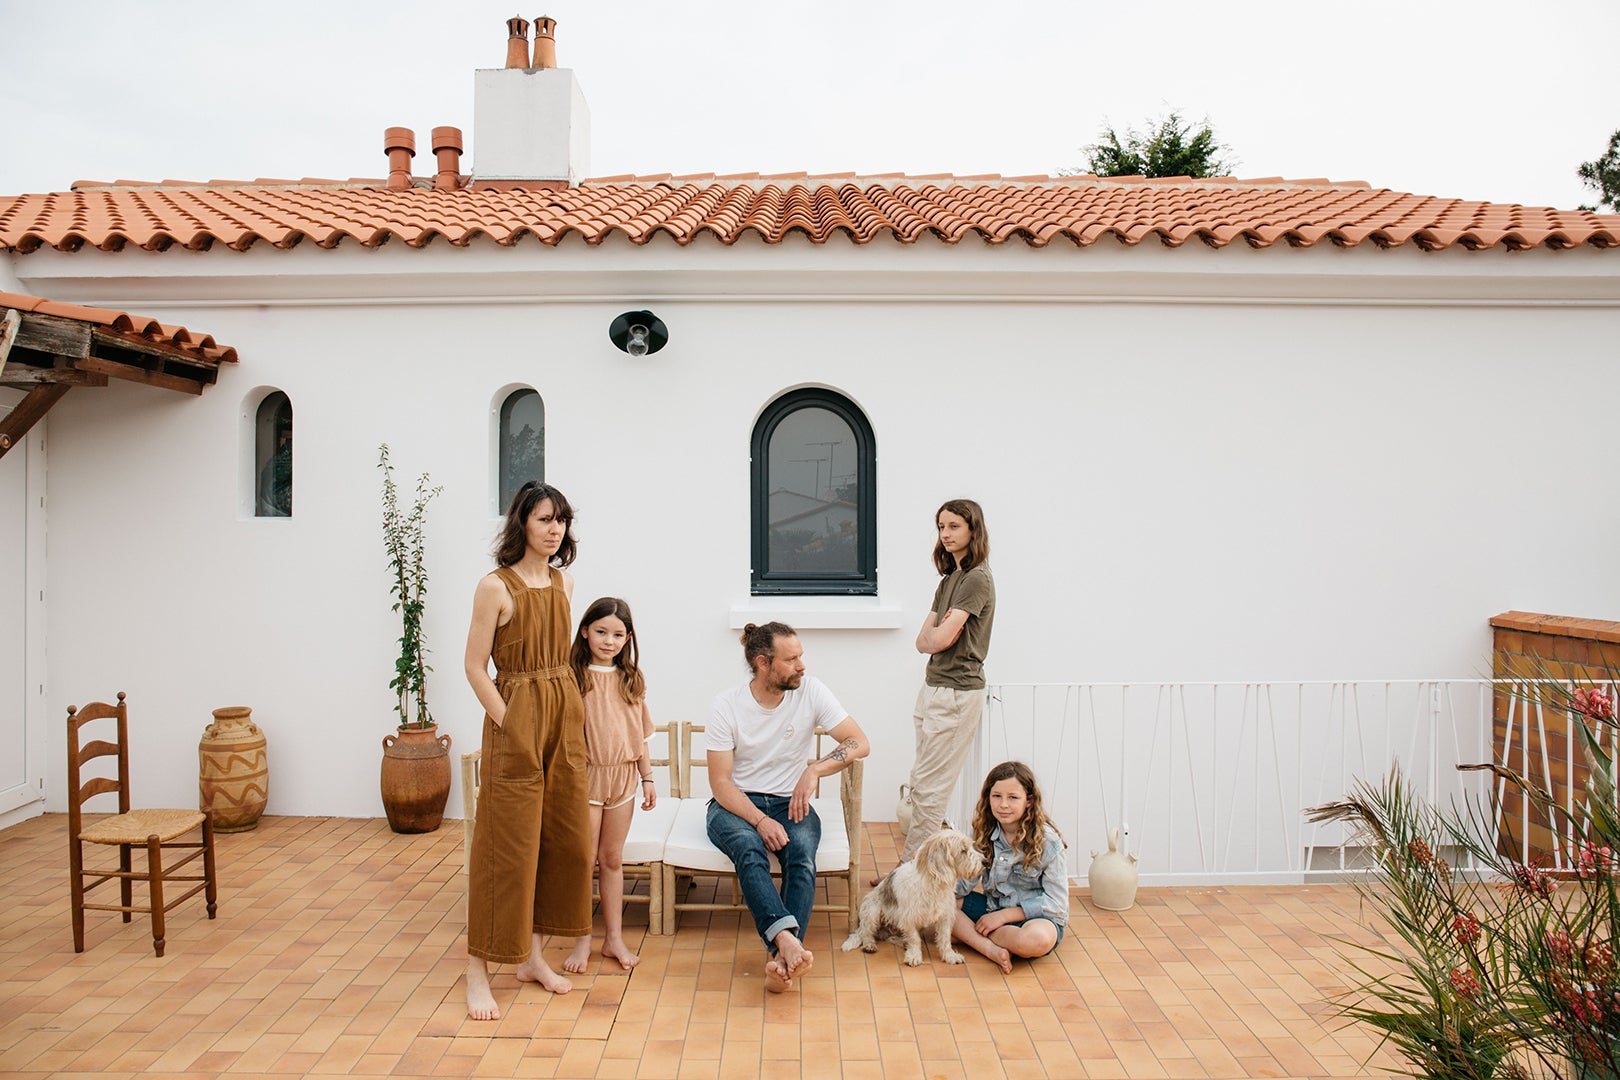 Family portrait outside of home with tiled outdoor floor and dog